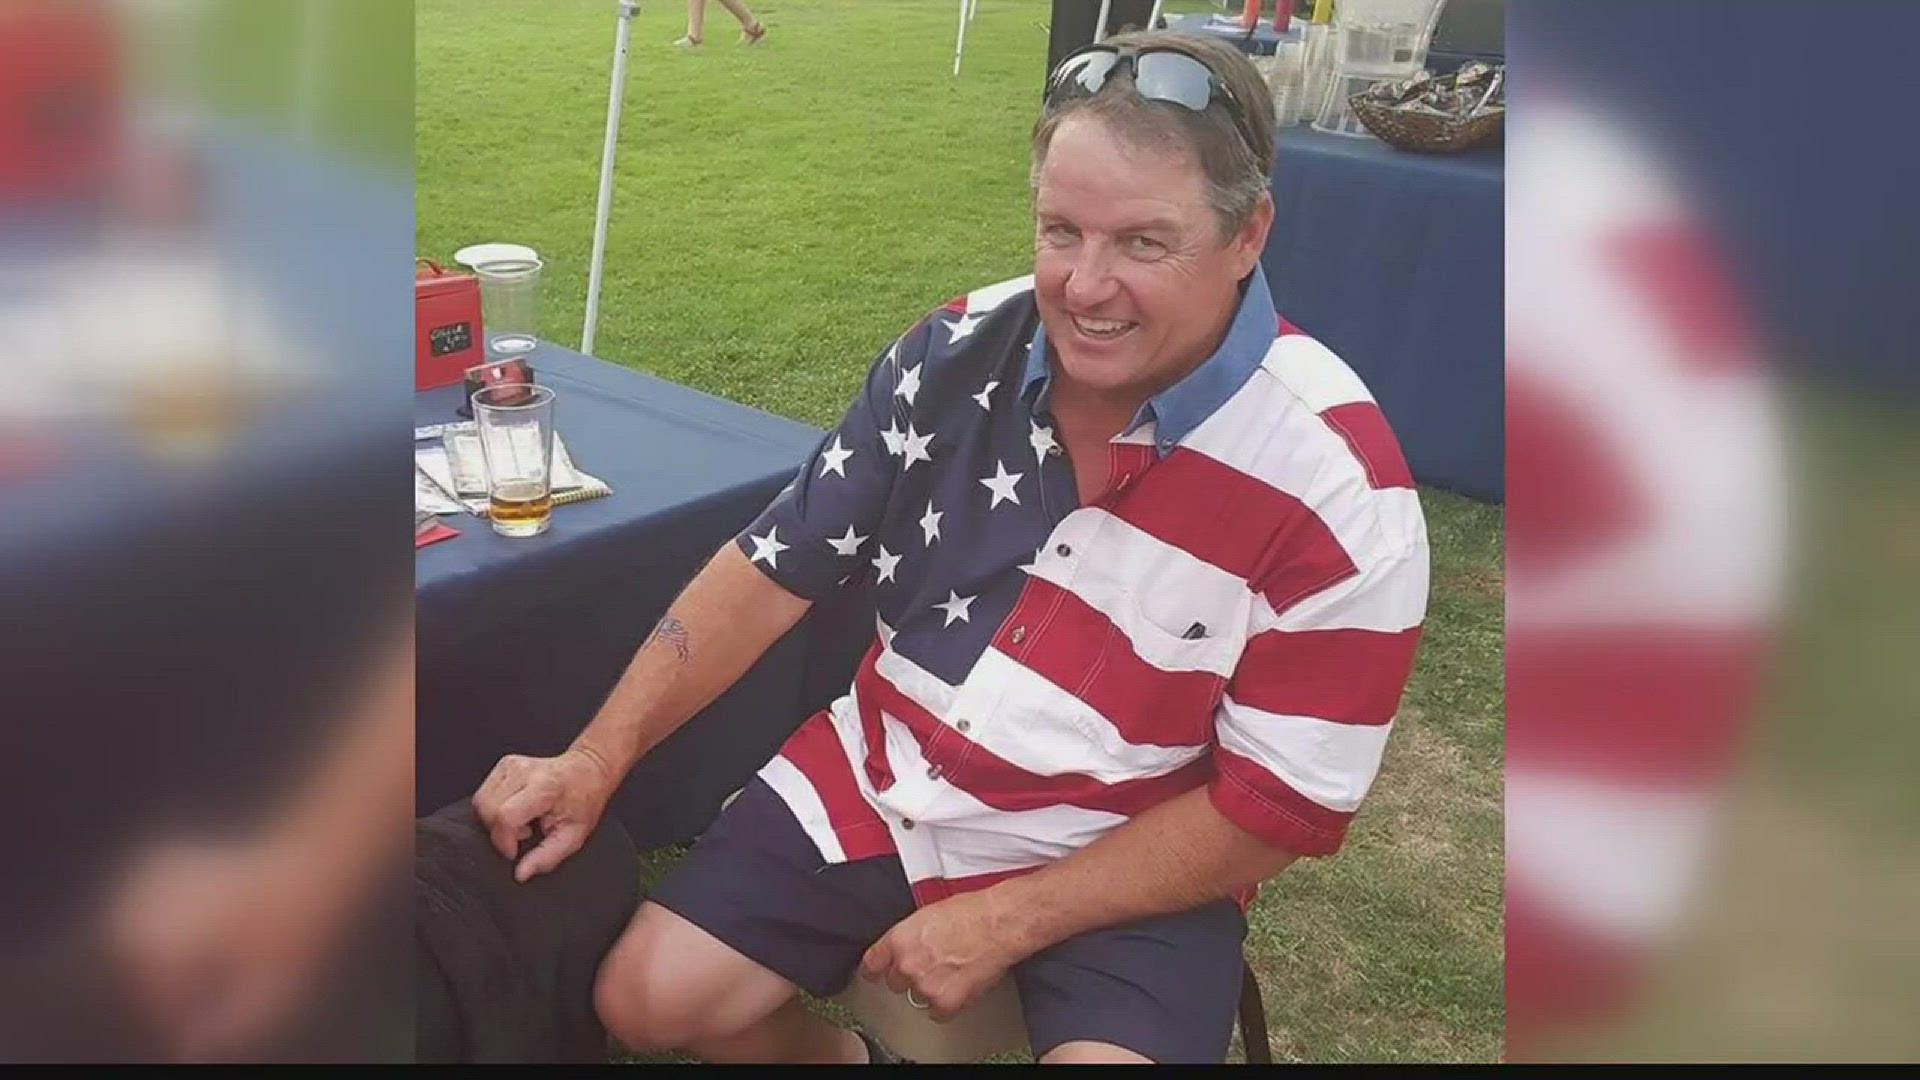 A Cameron Park man was killed in the mass shooting that occurred during an outdoor Las Vegas concert late Sunday night, the family of the man says.